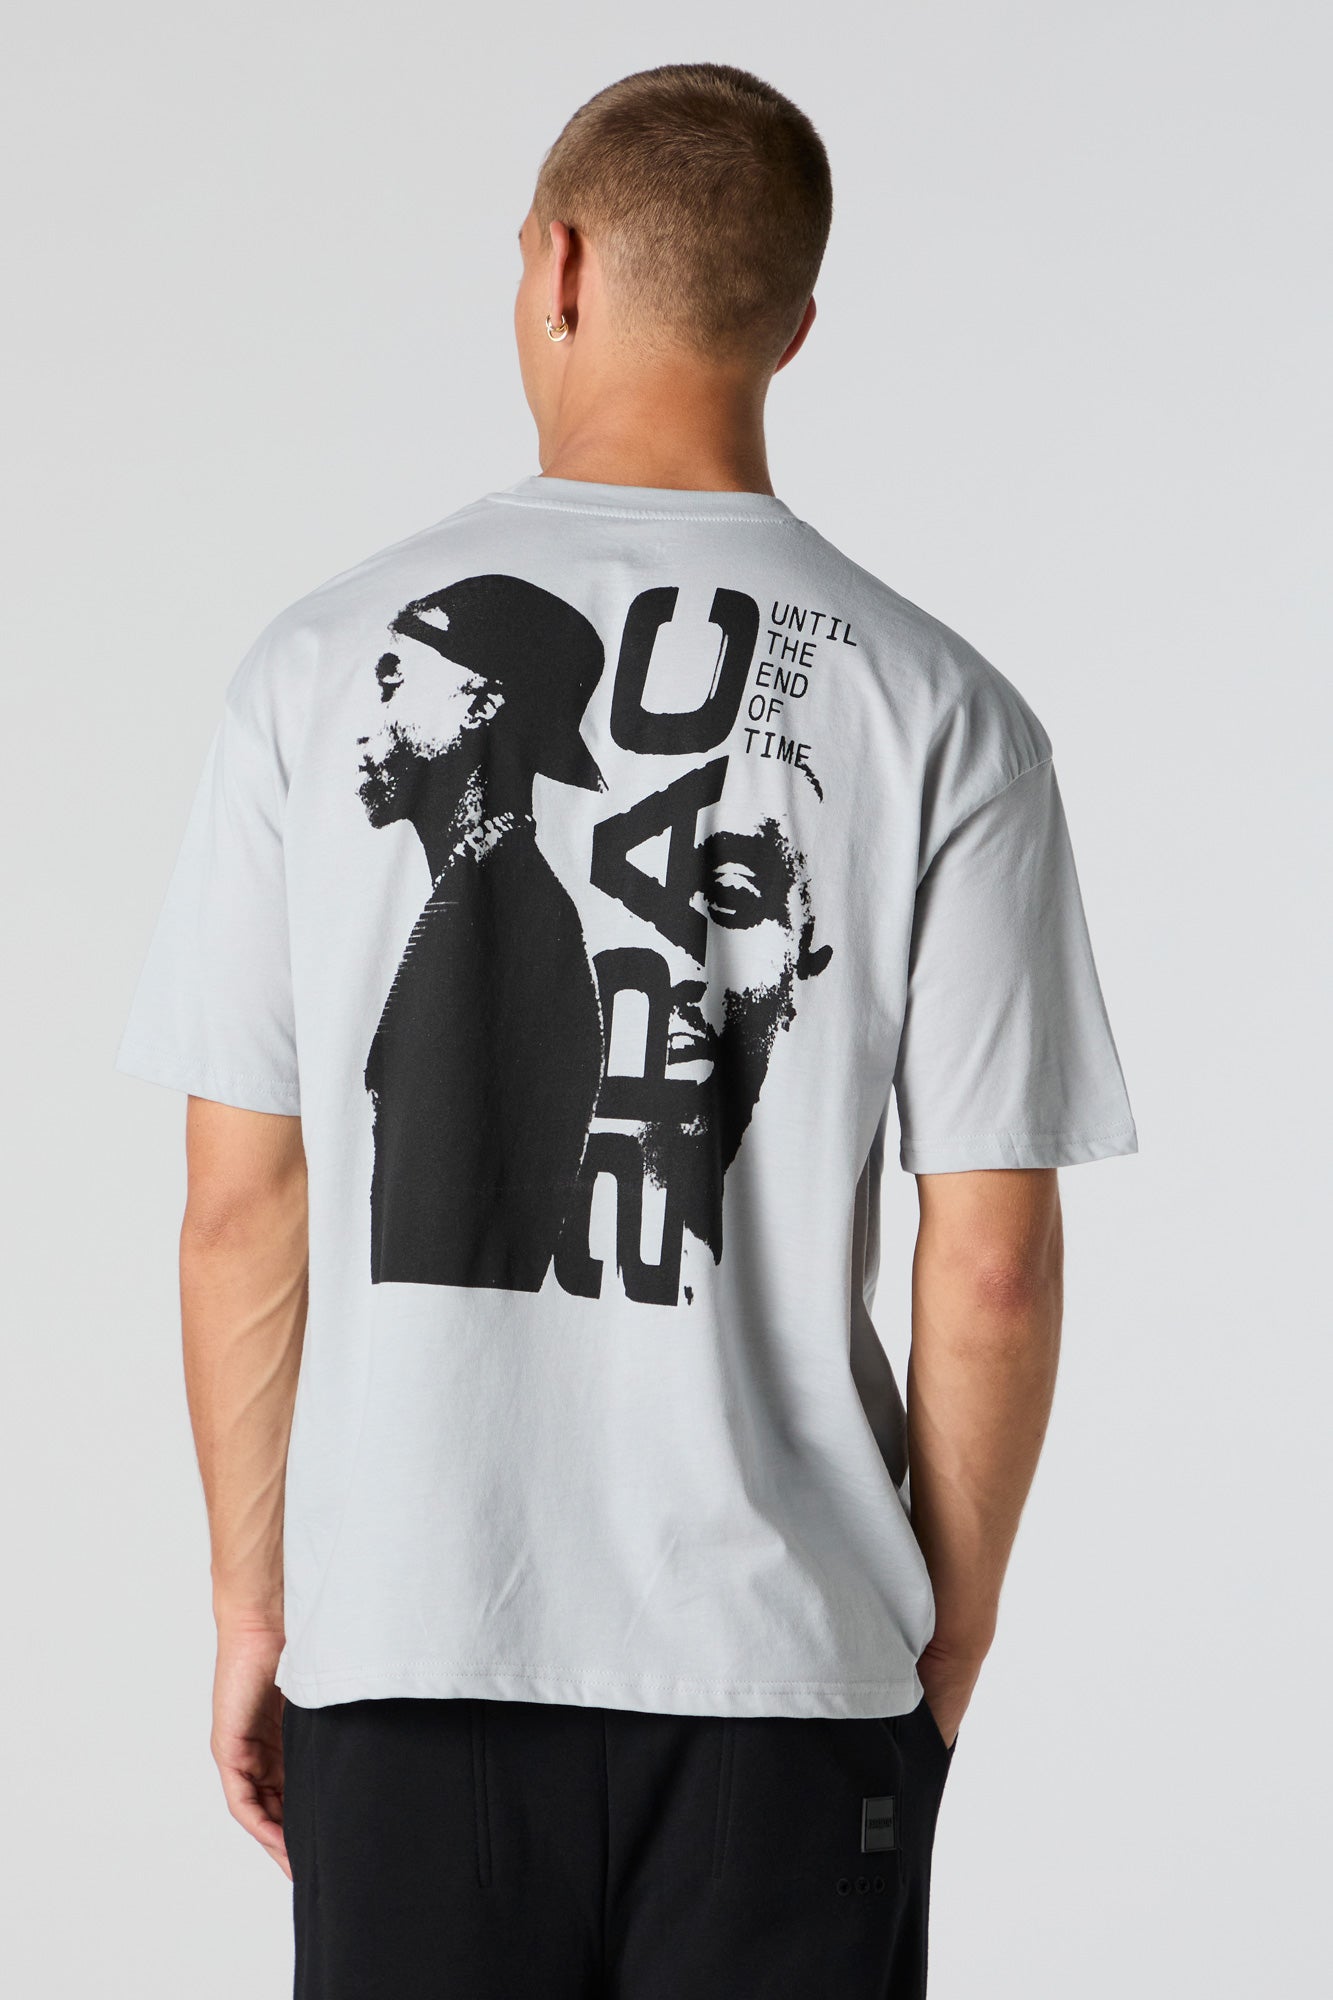 Tupac Til the End of Time Graphic T-Shirt